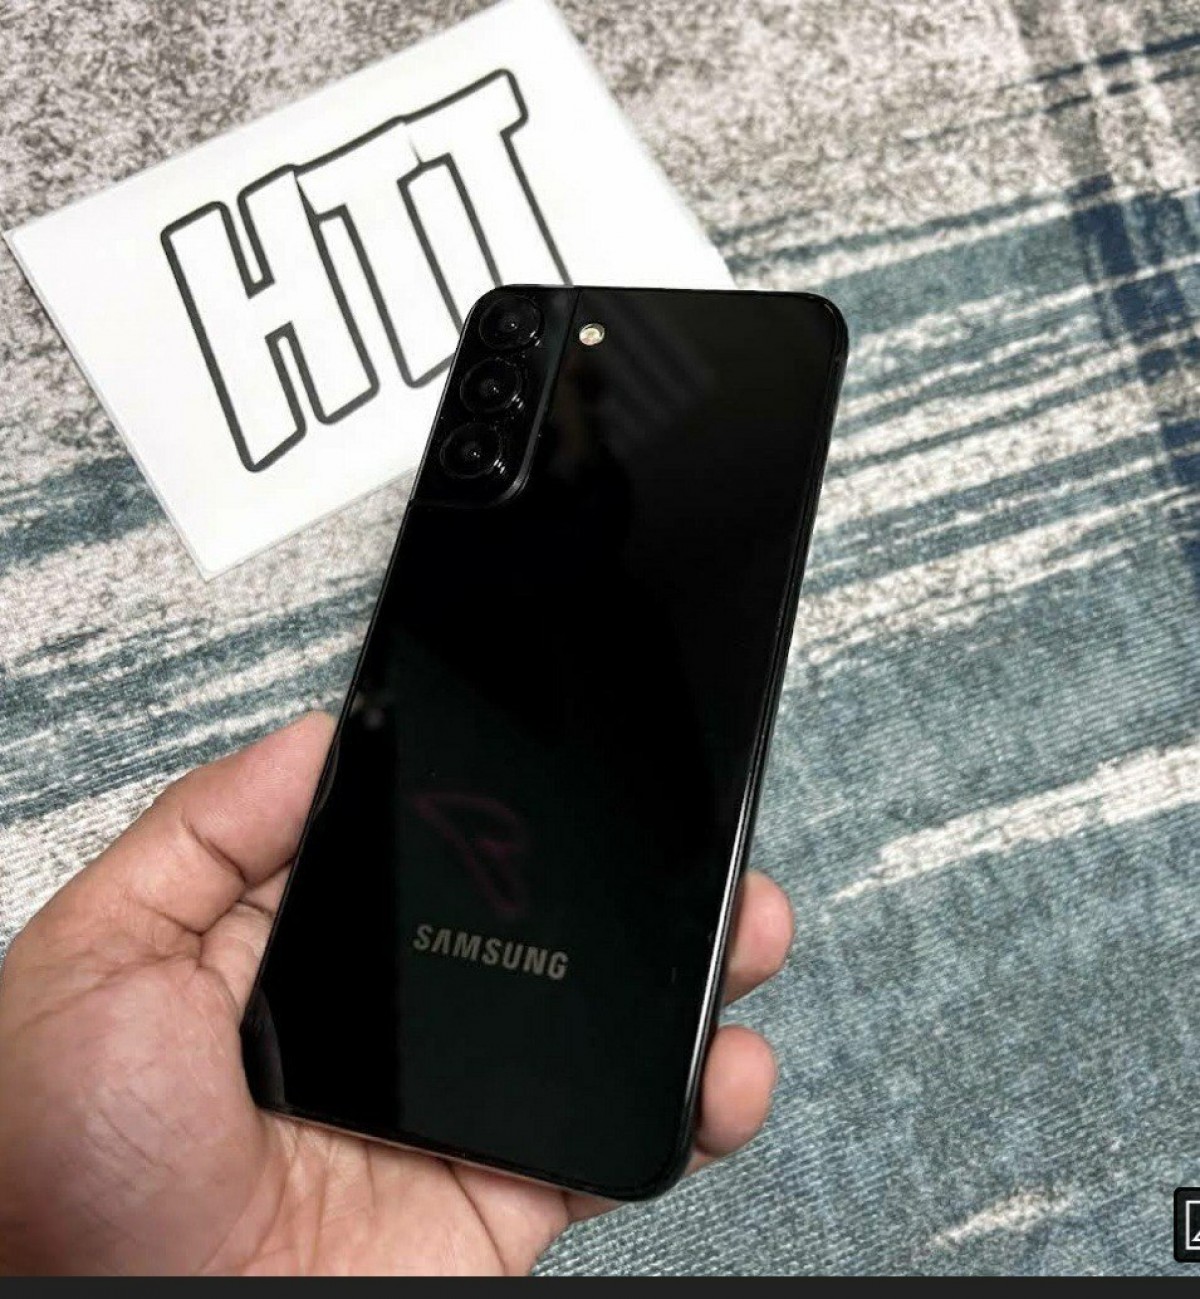 Samsung Galaxy S22 appears in live photos, S22 Ultra gets certified at FCC